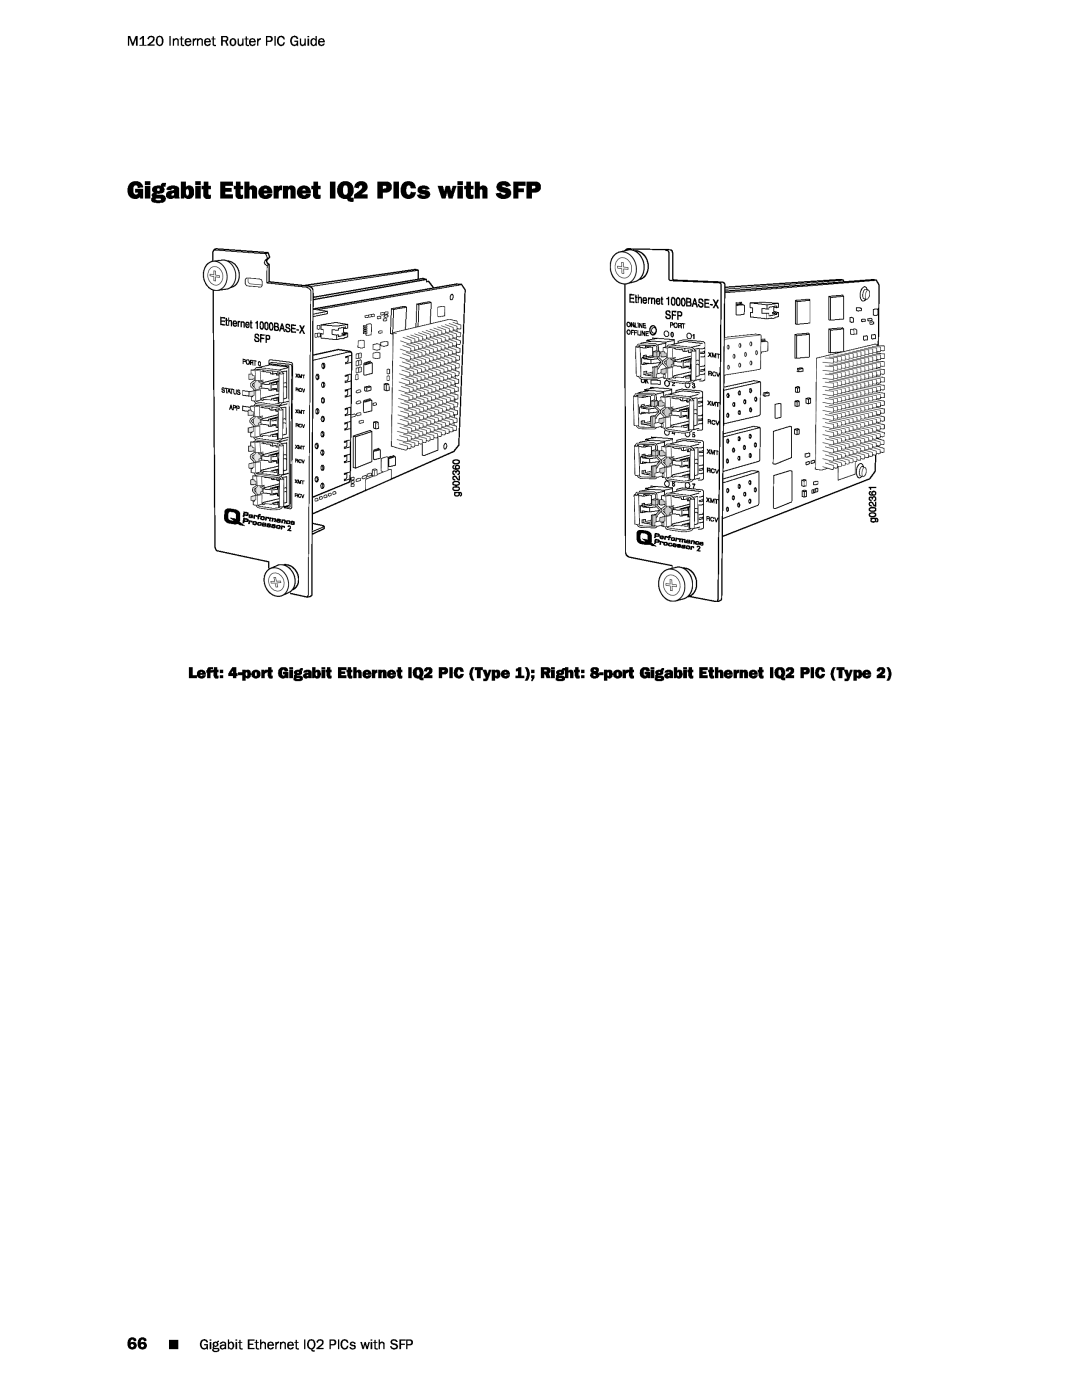 Juniper Networks manual Gigabit Ethernet IQ2 PICs with SFP, M120 Internet Router PIC Guide 